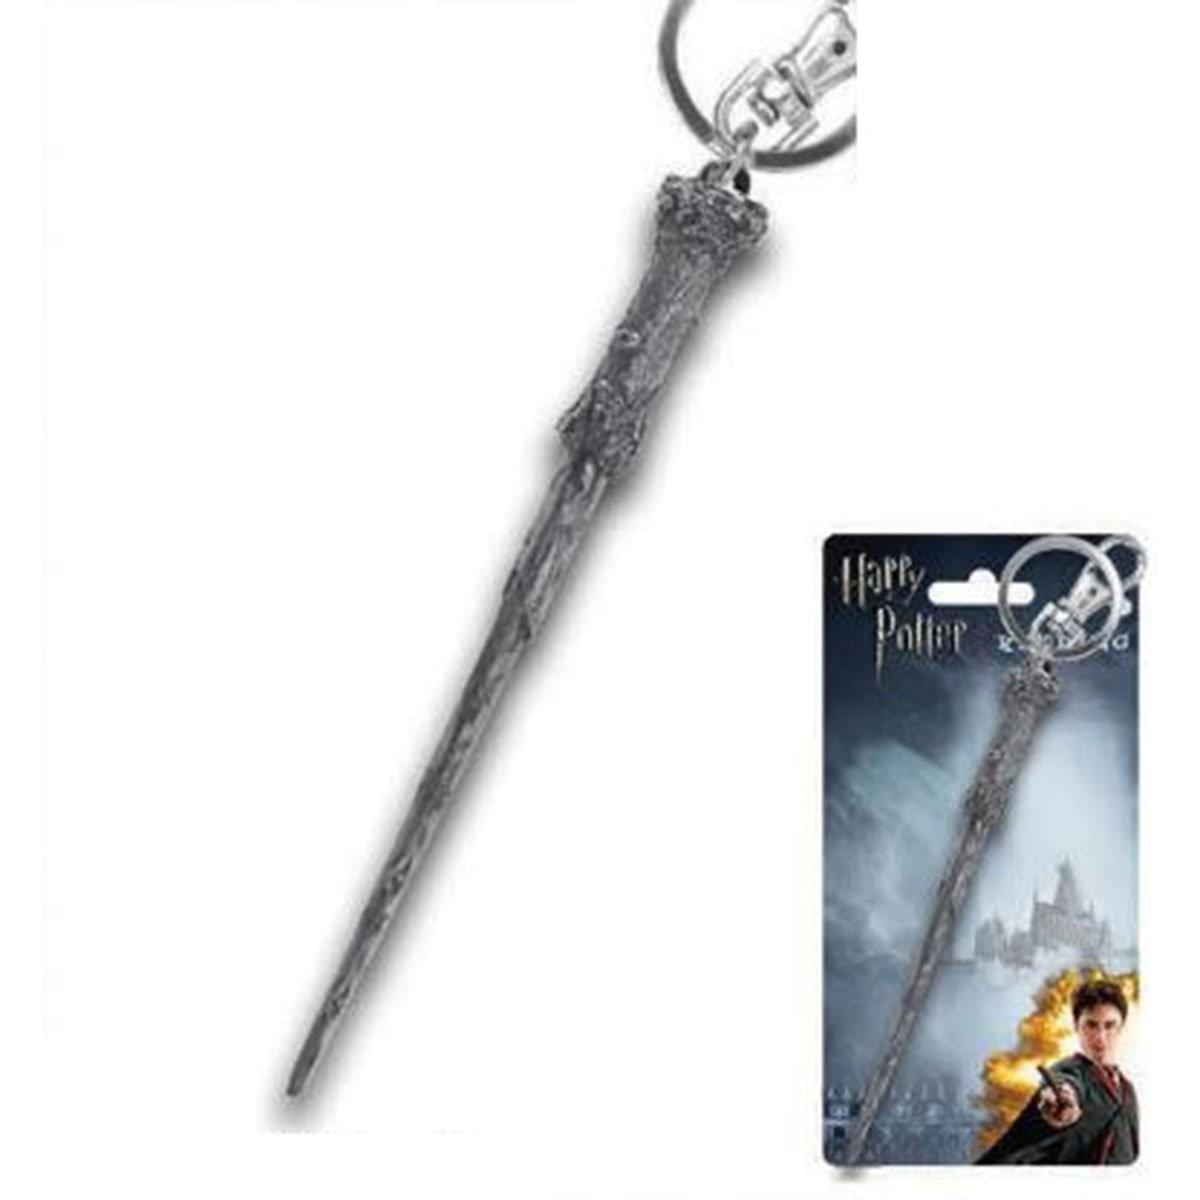 Harry Potter Pewter Key Ring: Harry's Wand